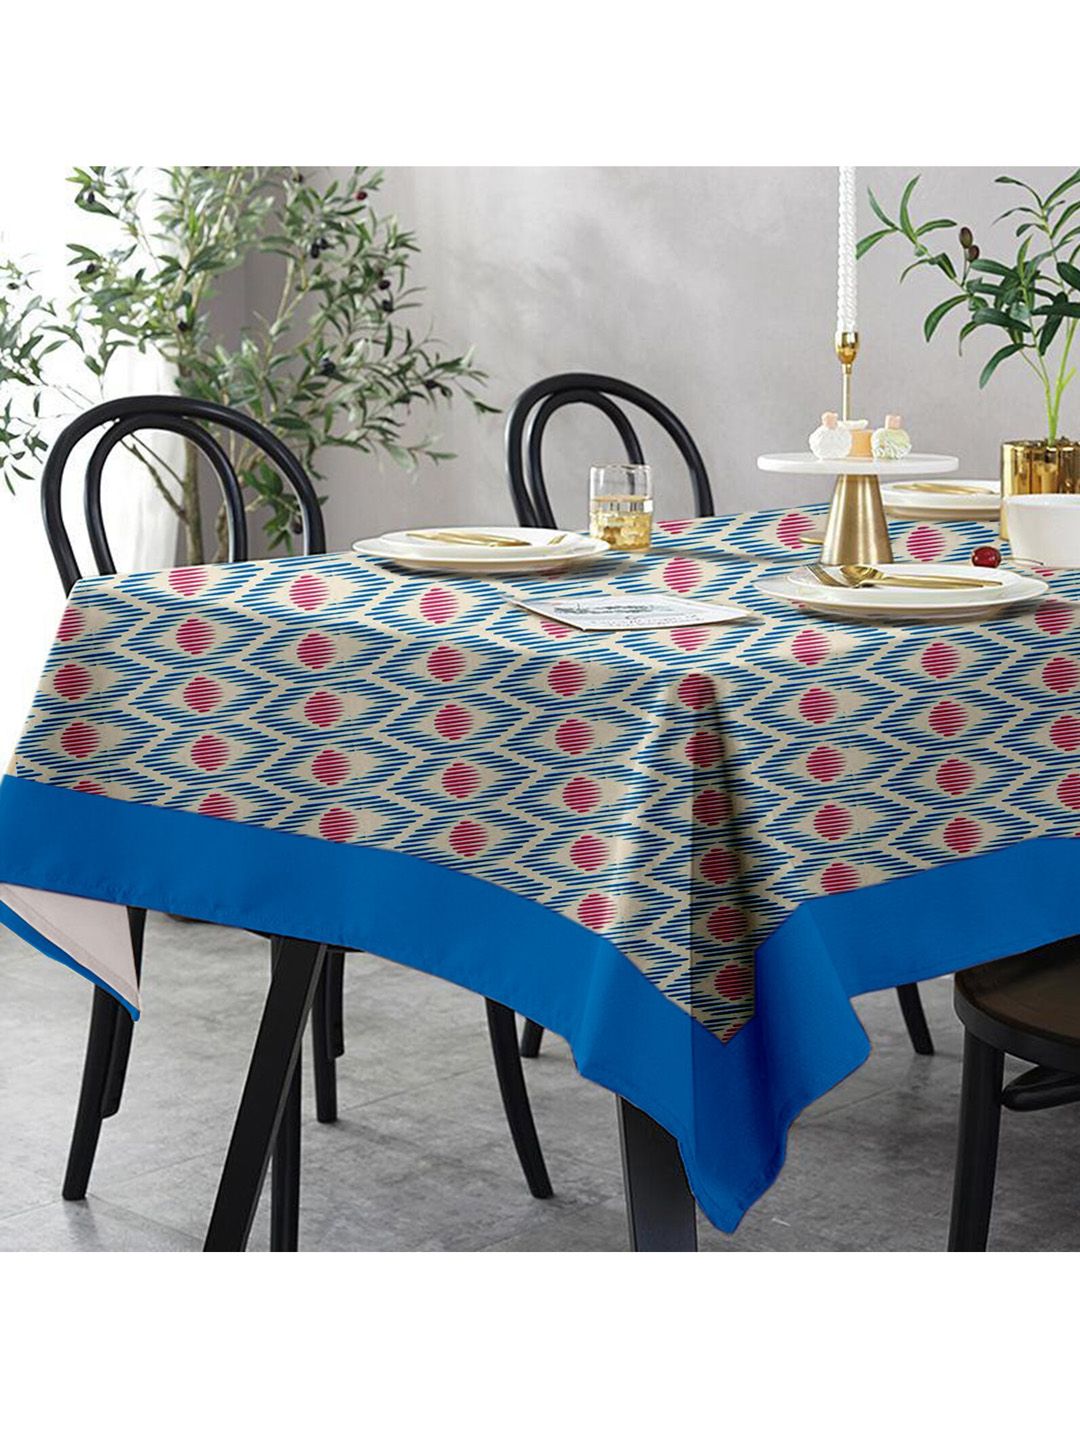 Lushomes Blue & Red Diamond Printed 12 Seater Table Cloth Price in India